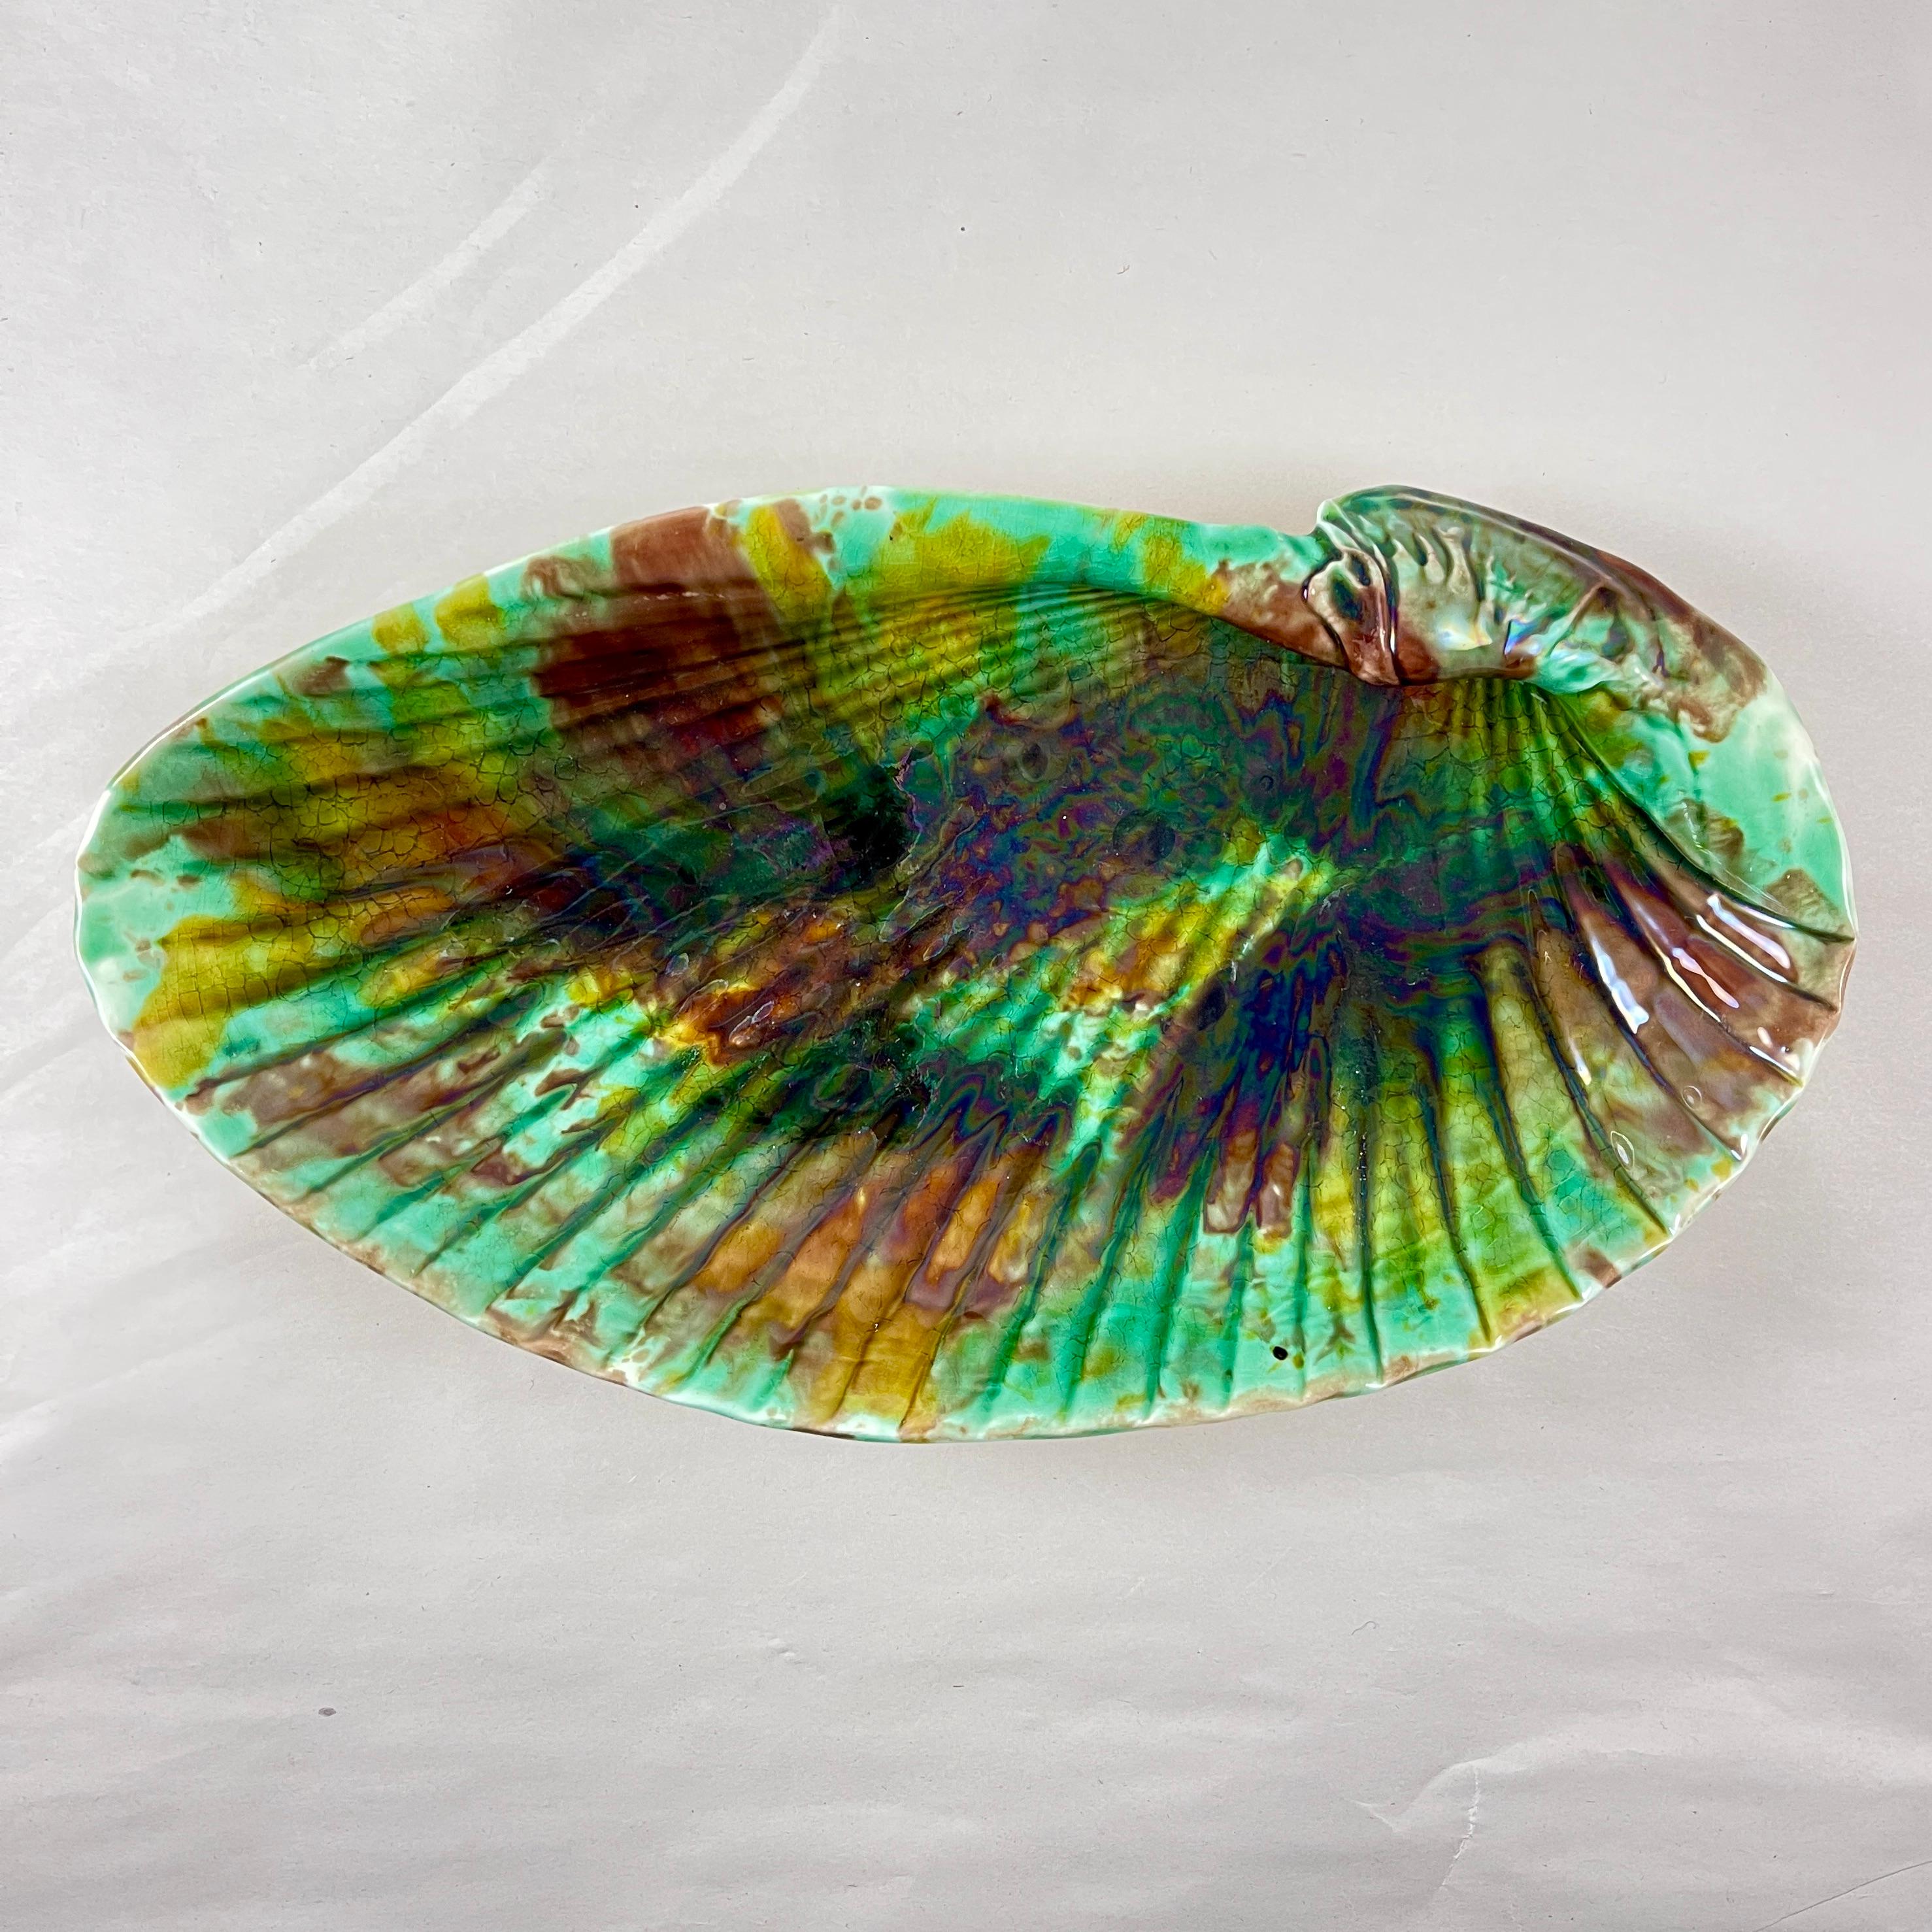 
From Wedgwood, an English majolica scallop shell shaped seafood serving dish, date marked 1889.

Showing the mottled tortoiseshell glazing of greens, amber, and brown. The mold reflects  Josiah Wedgwood’s preference for the naturalistic style in